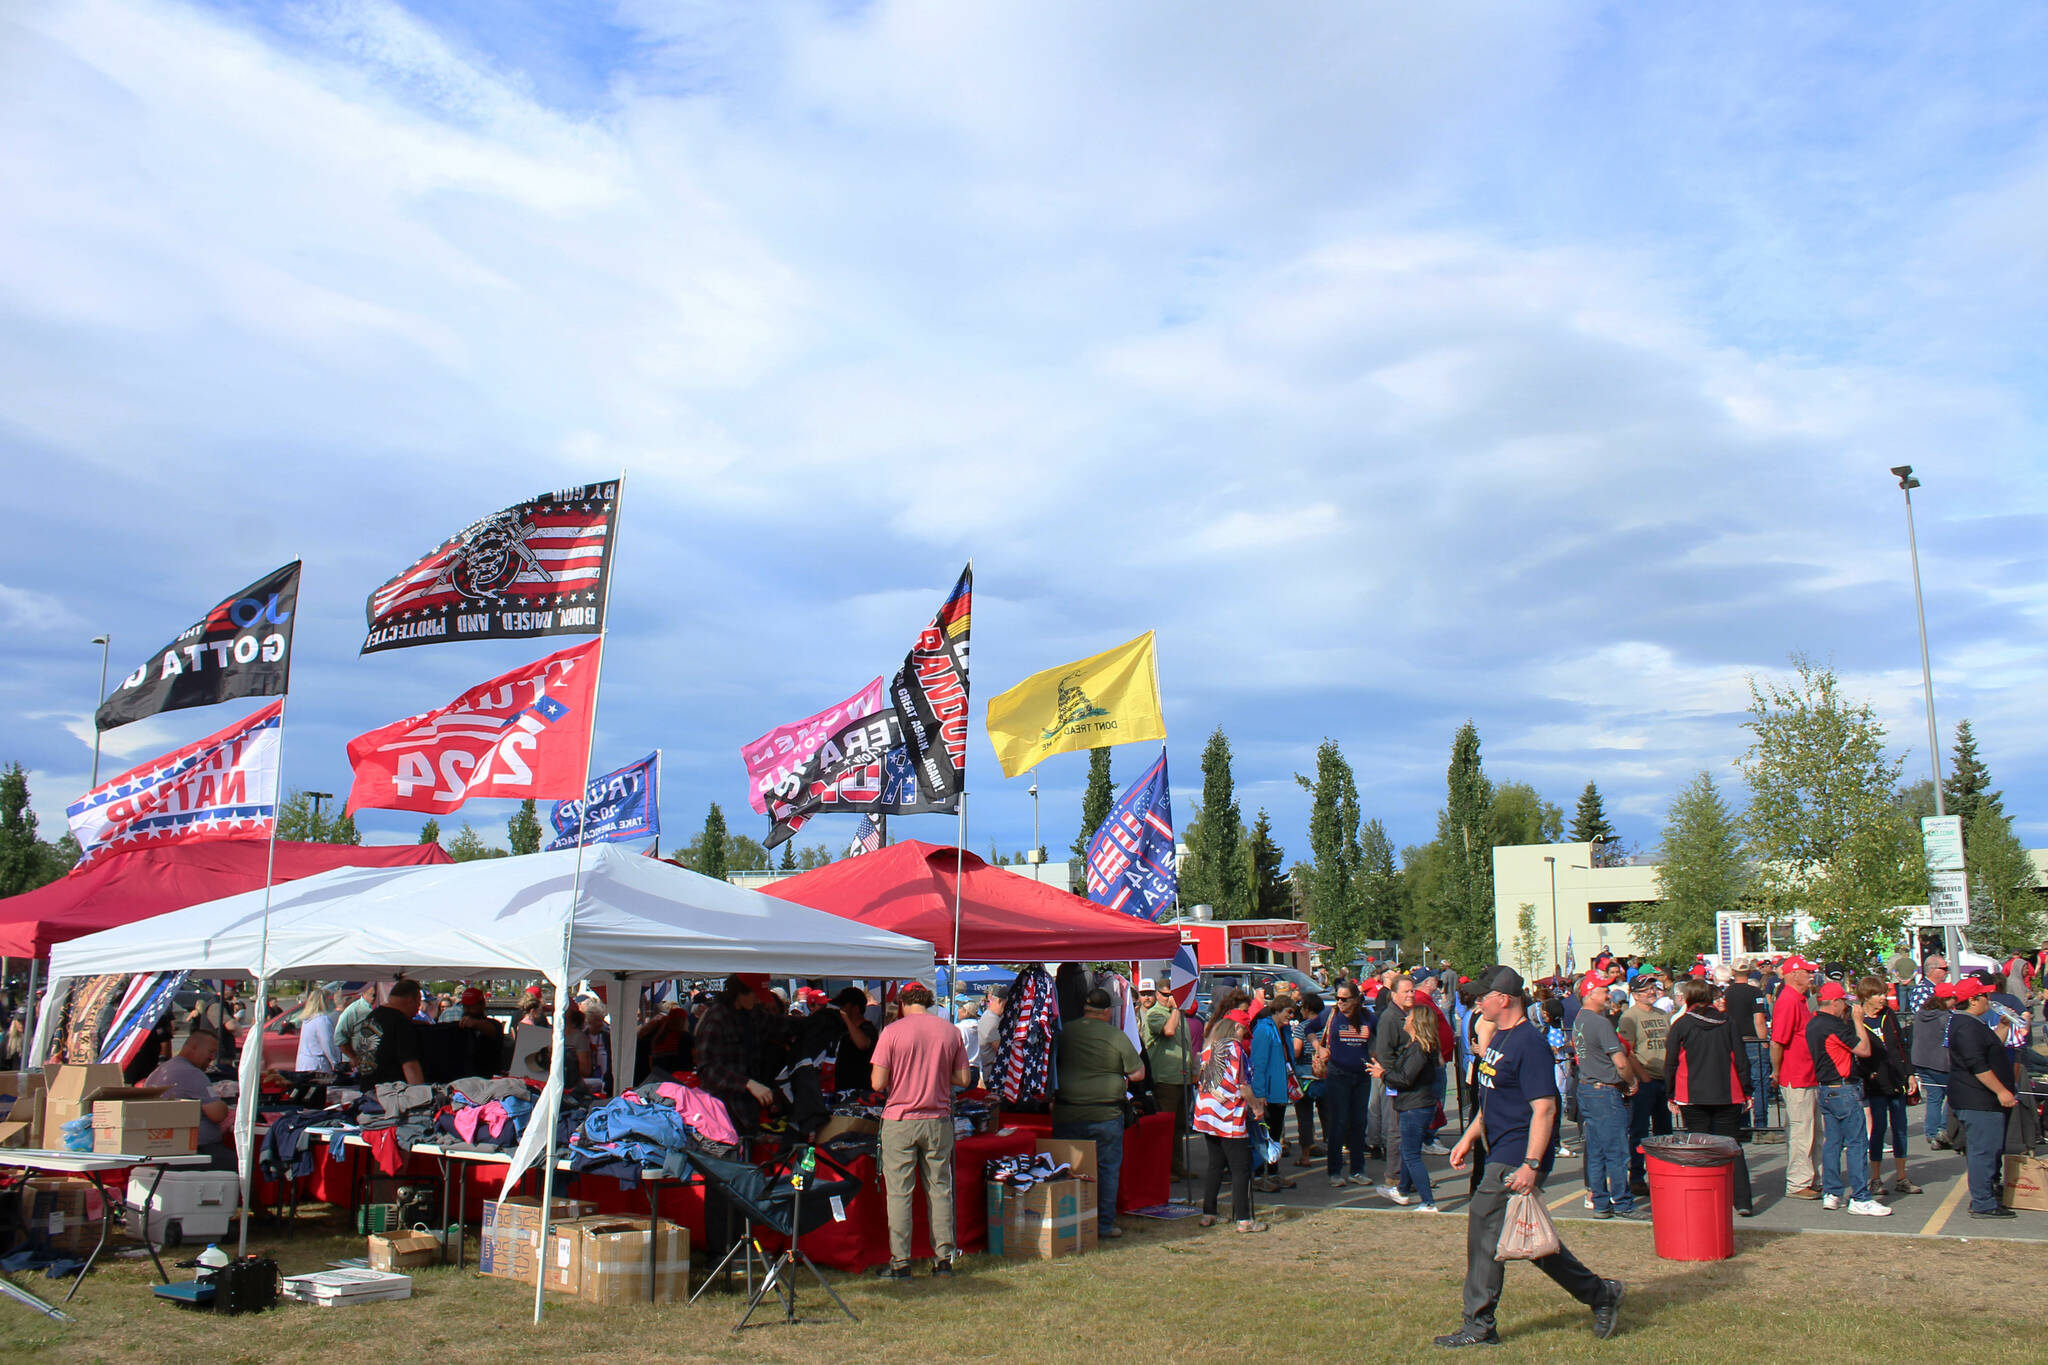 Vendors sell flags and other merchandise outside of the Alaska Airlines Center, where a Save America rally was being held, on Saturday, July 9, 2022, in Anchorage, Alaska. Former President Donald Trump, U.S. Senate candidate Kelly Tshibaka and U.S. House candidate Sarah Palin were among the event’s speakers. (Ashlyn O’Hara/Peninsula Clarion)